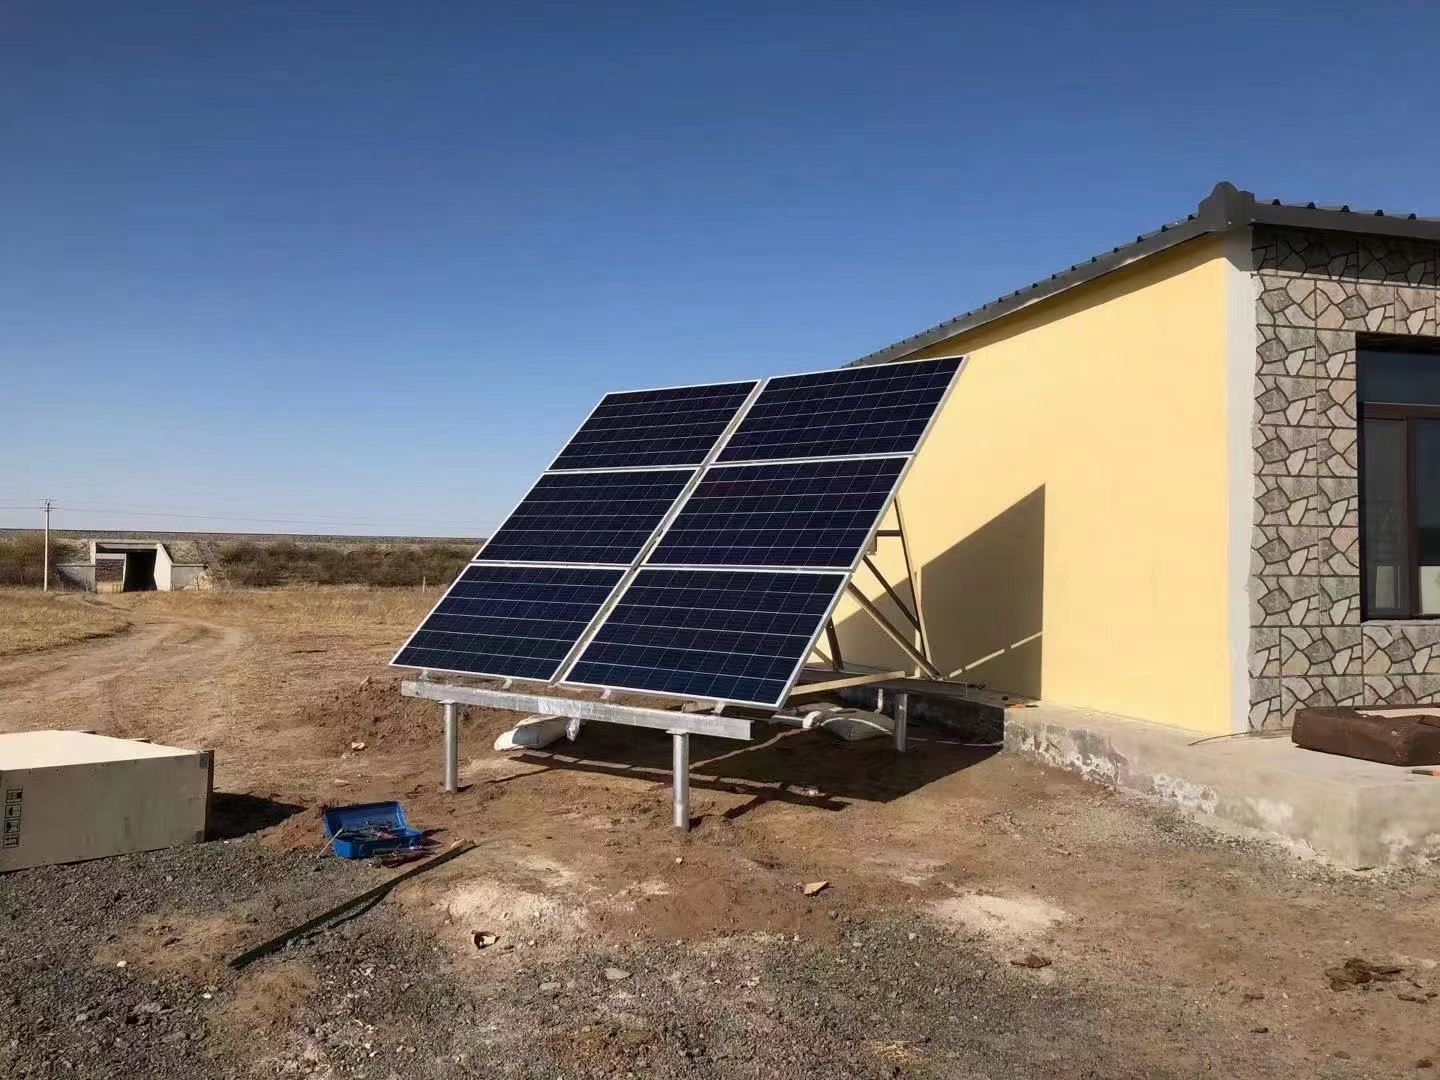 Off Grid Solar Power and the Benefits of Switching to Renewable Energy Sources